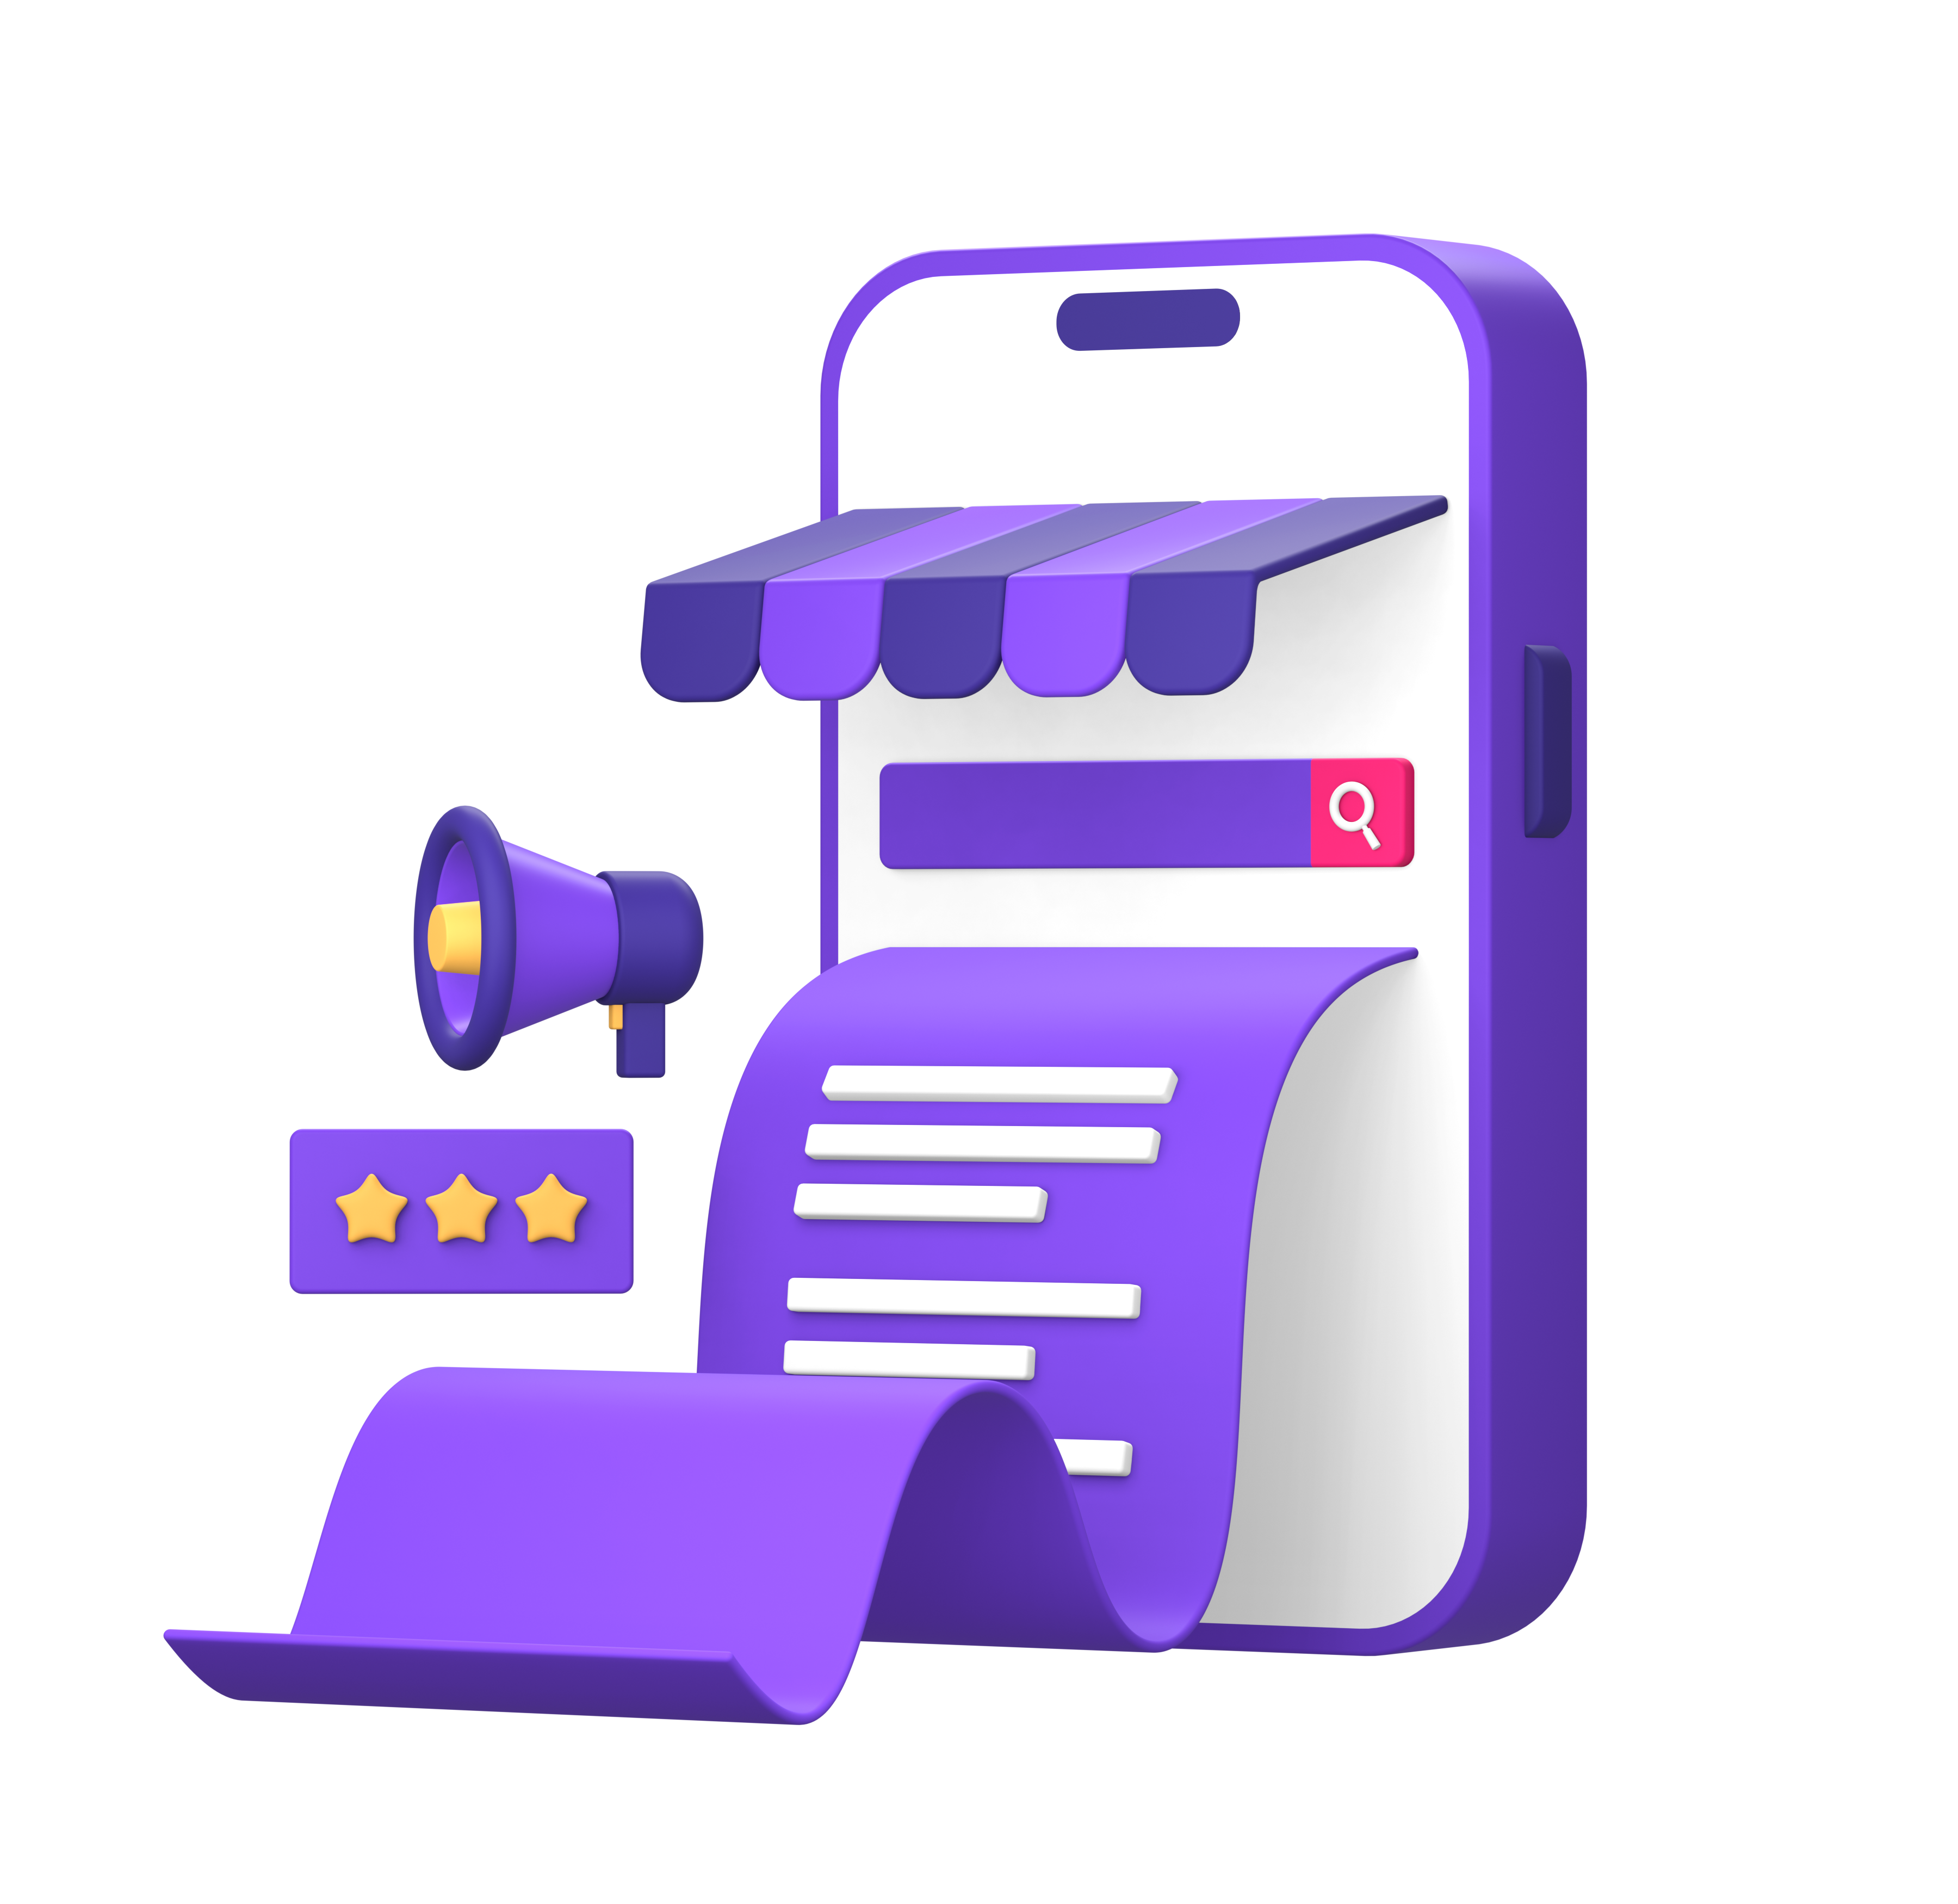 vecteezy 3d purple illustration icon of smartphone for online 33126722